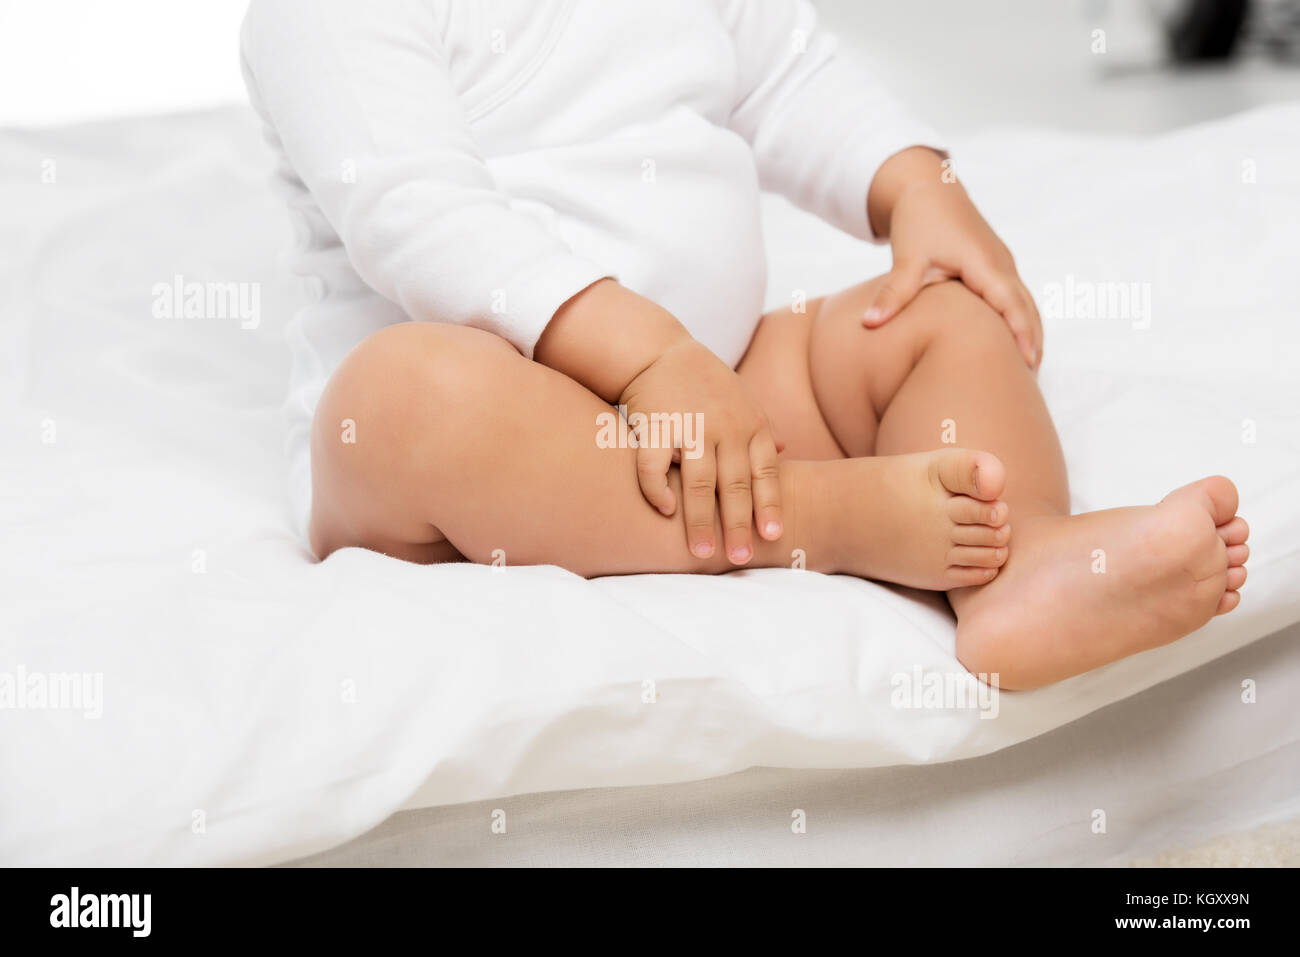 baby sitting on bed Stock Photo